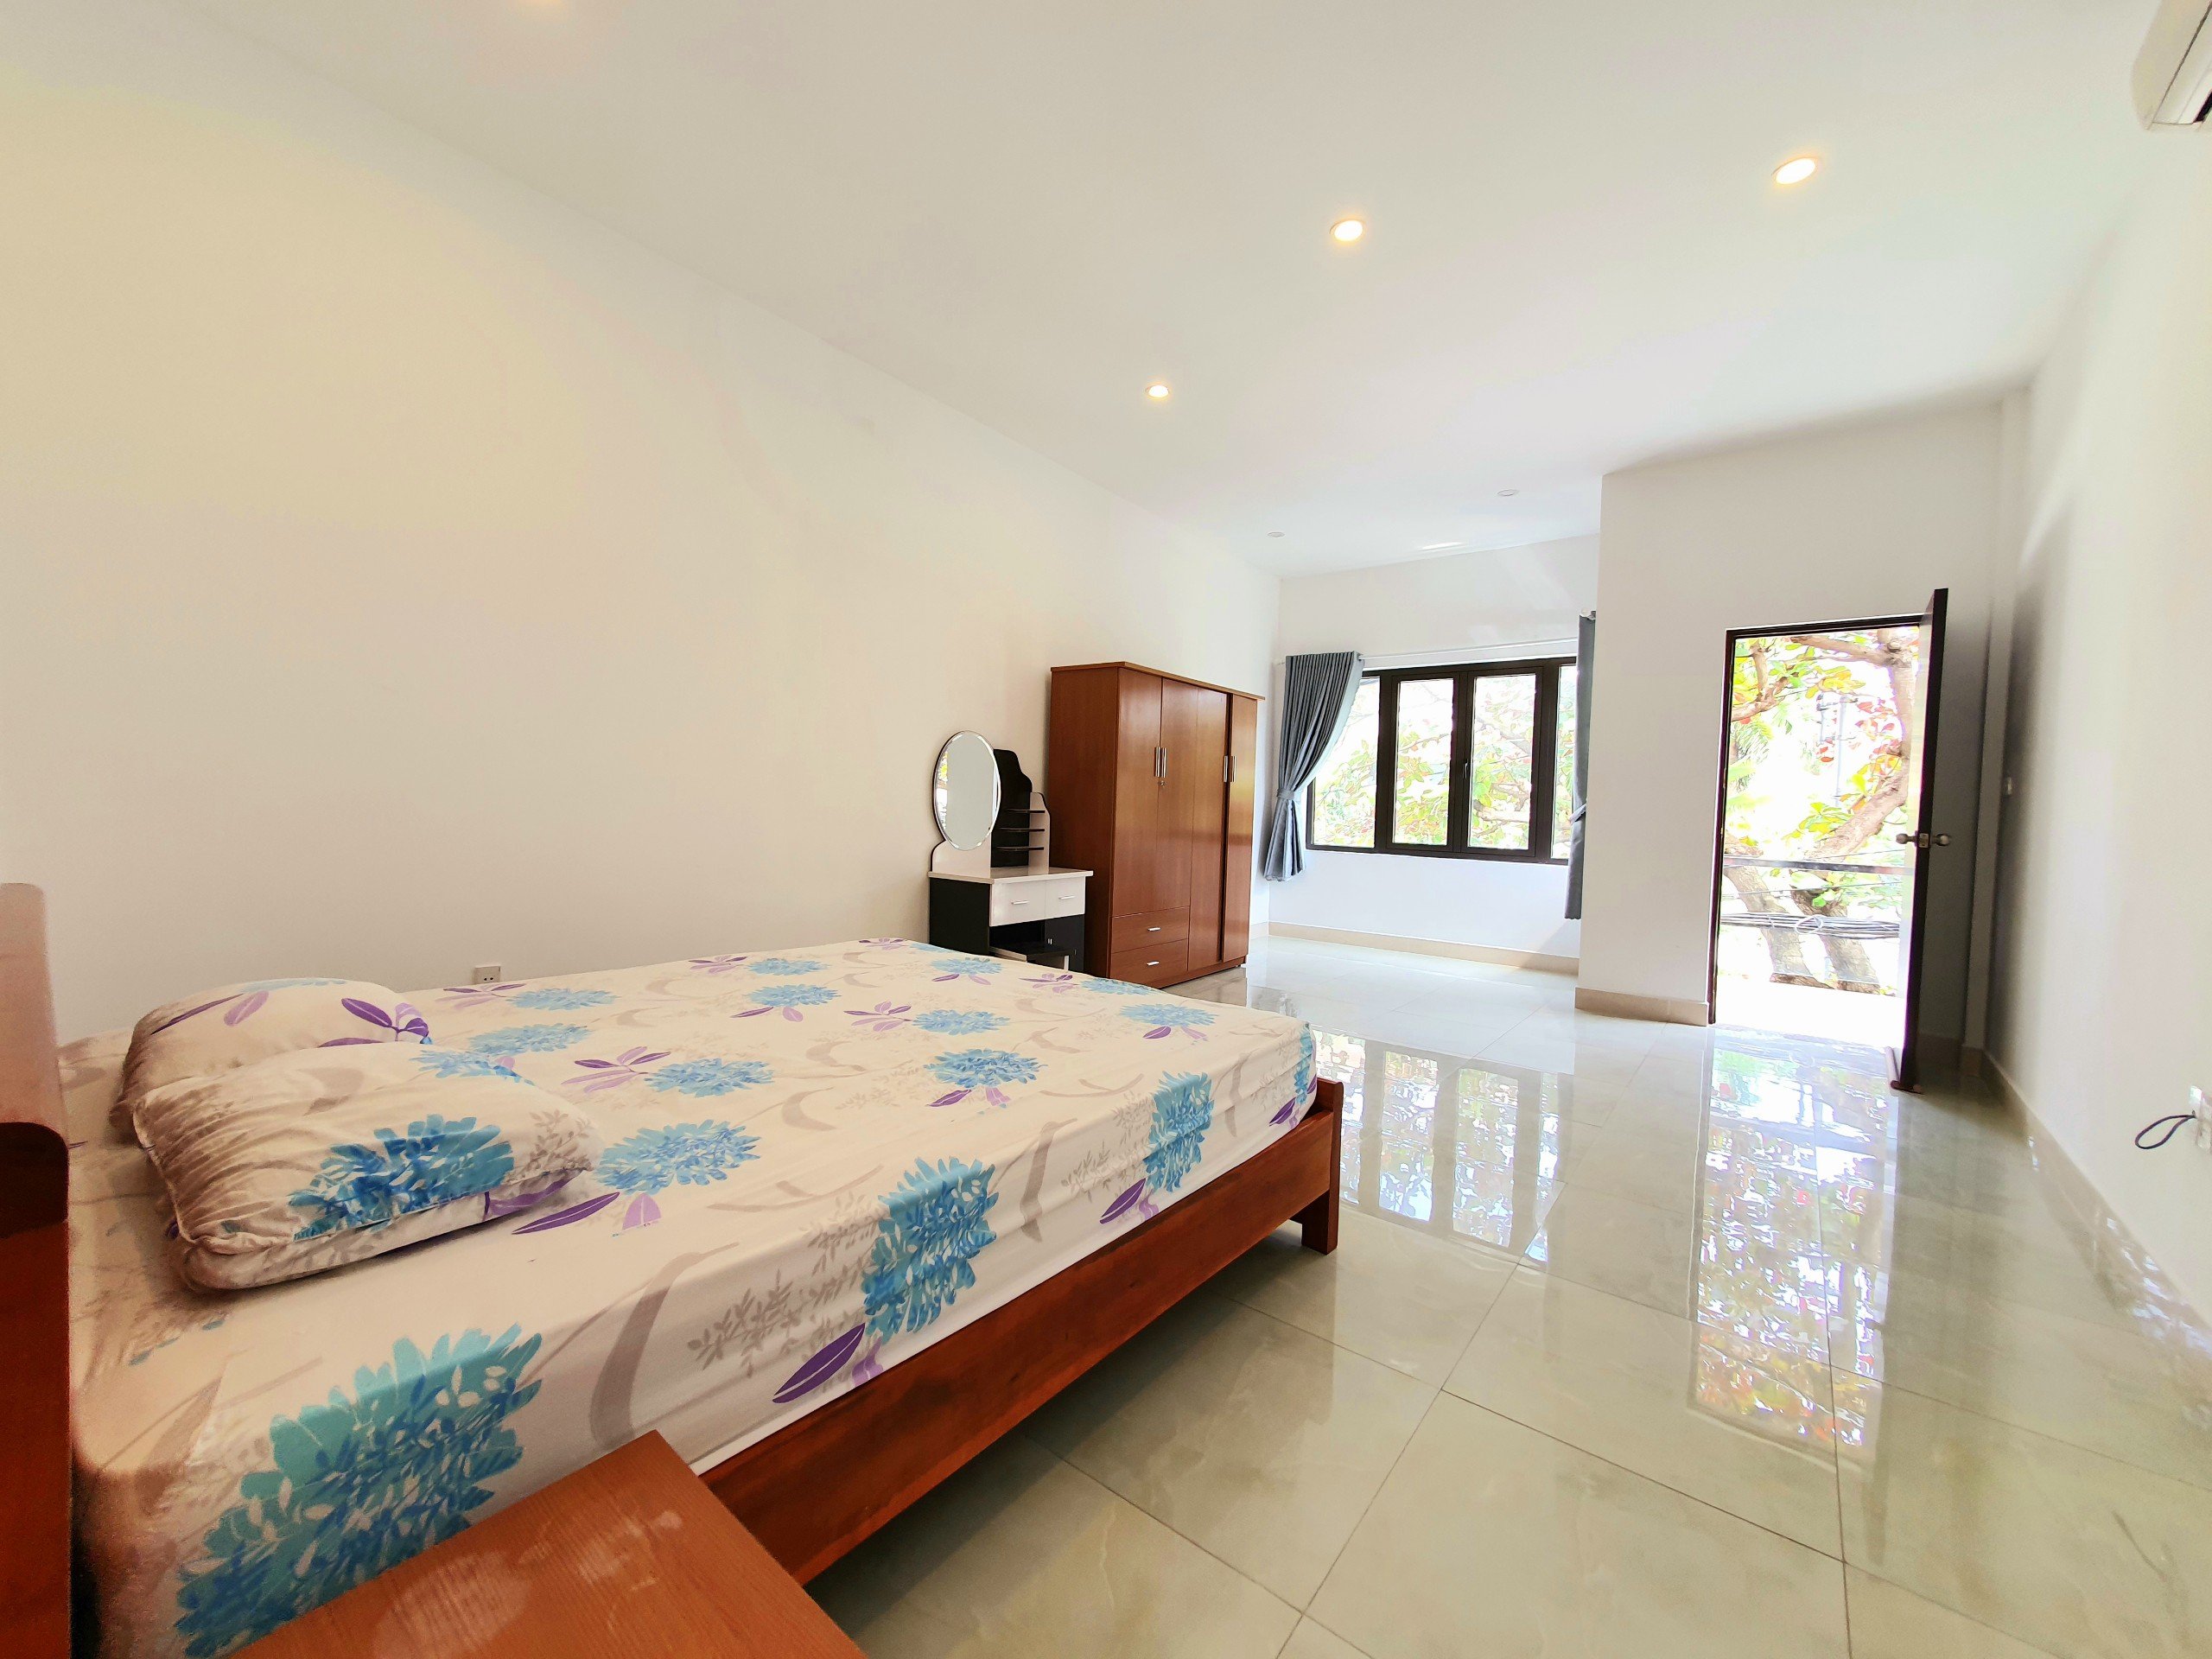 Large Three Bedrooms House For Rent Near Bac My An Market Da Nang